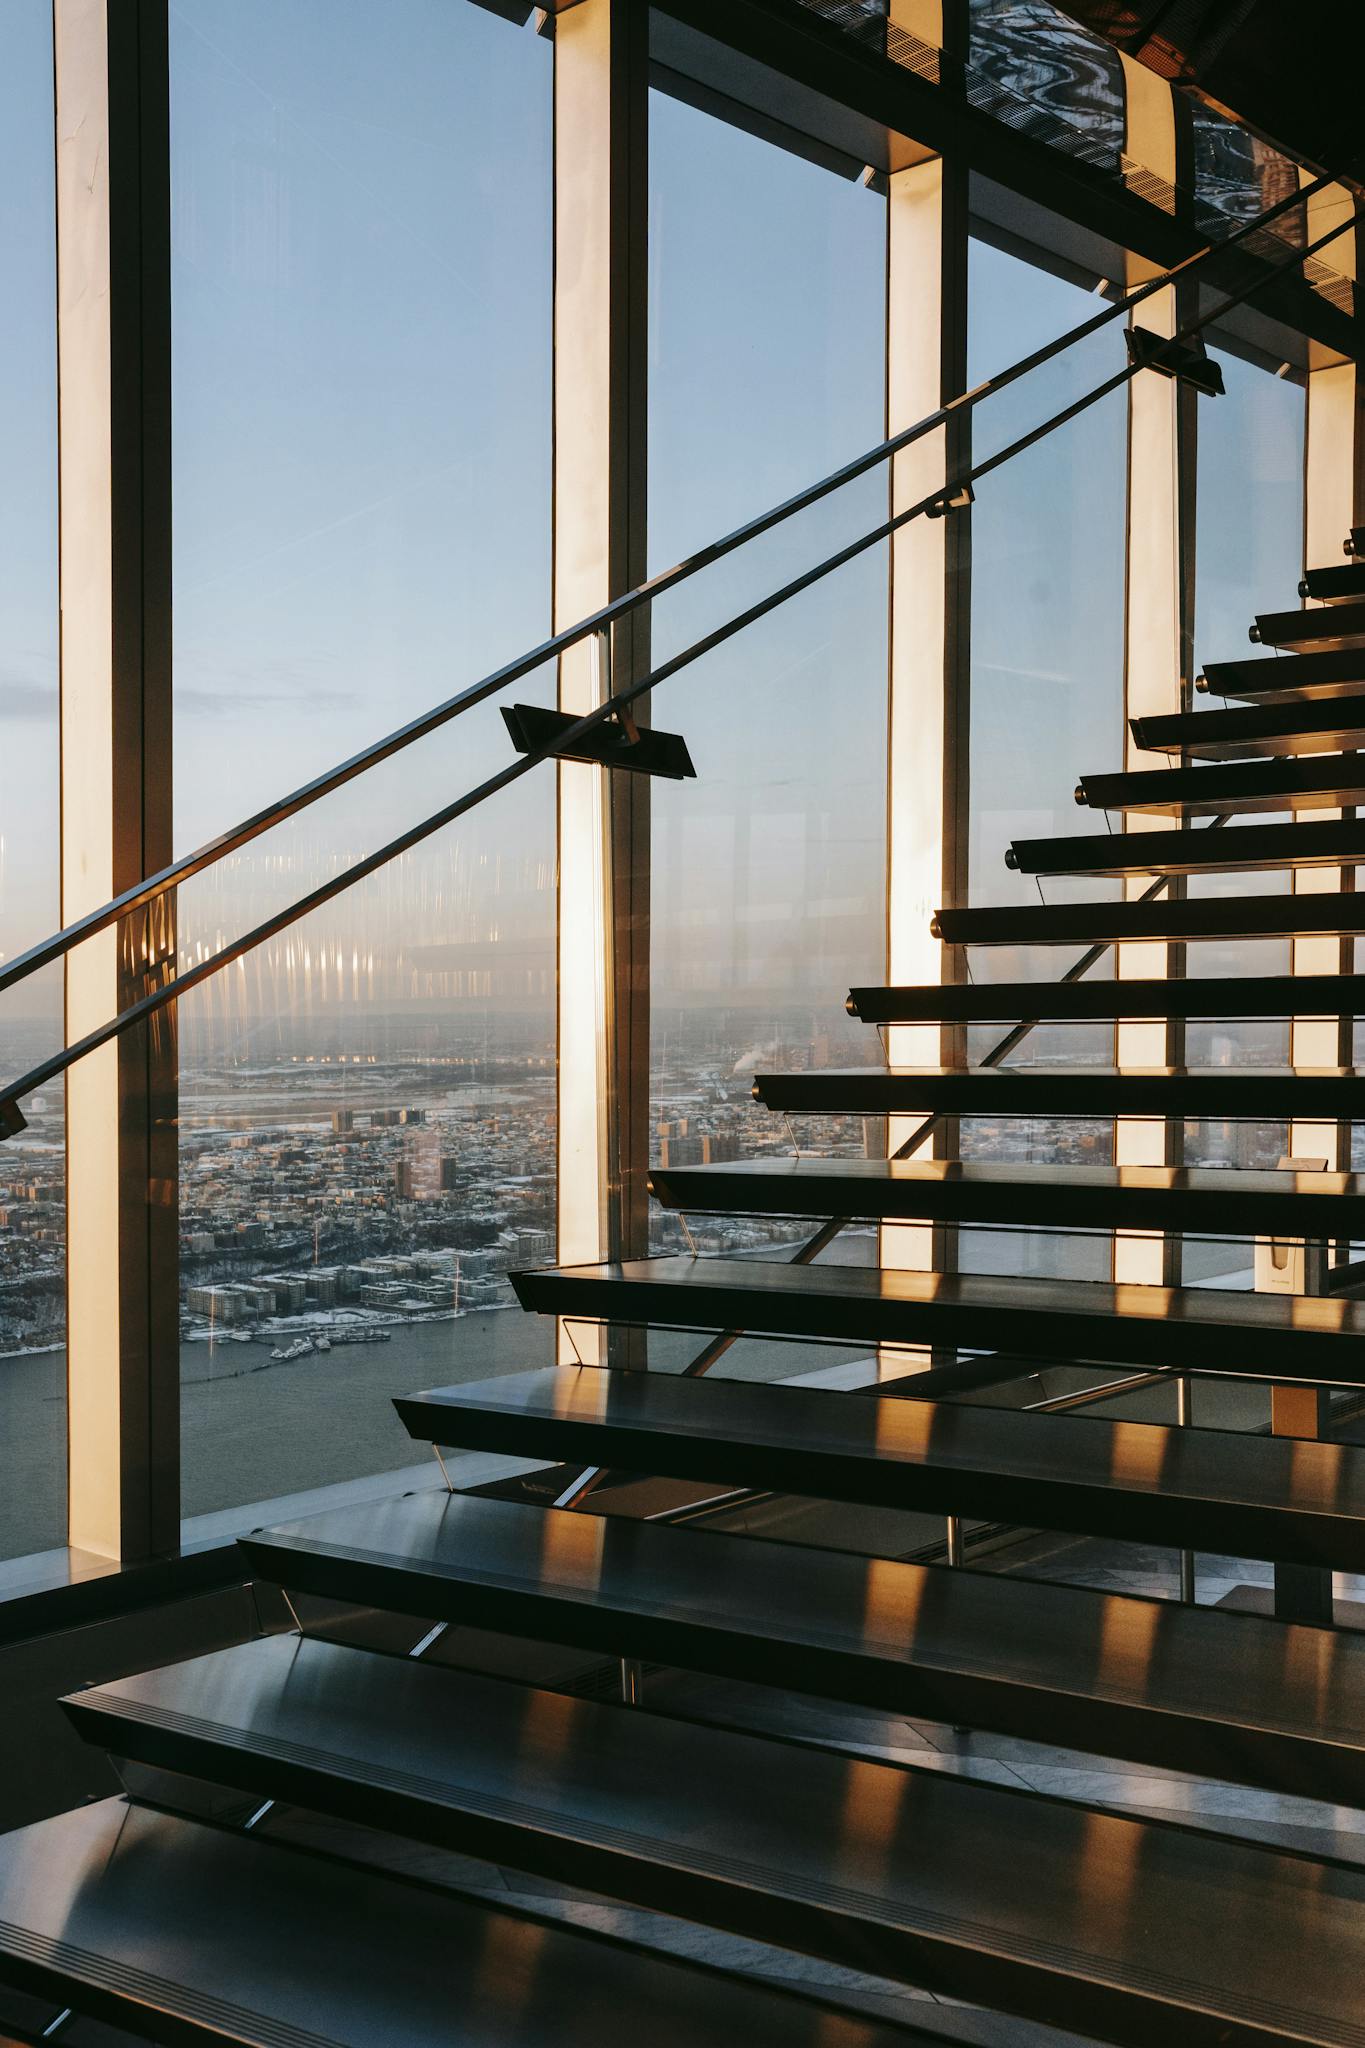 Stairway with metal railing located in contemporary business center with bright sunlight near glass wall overlooking modern city with buildings